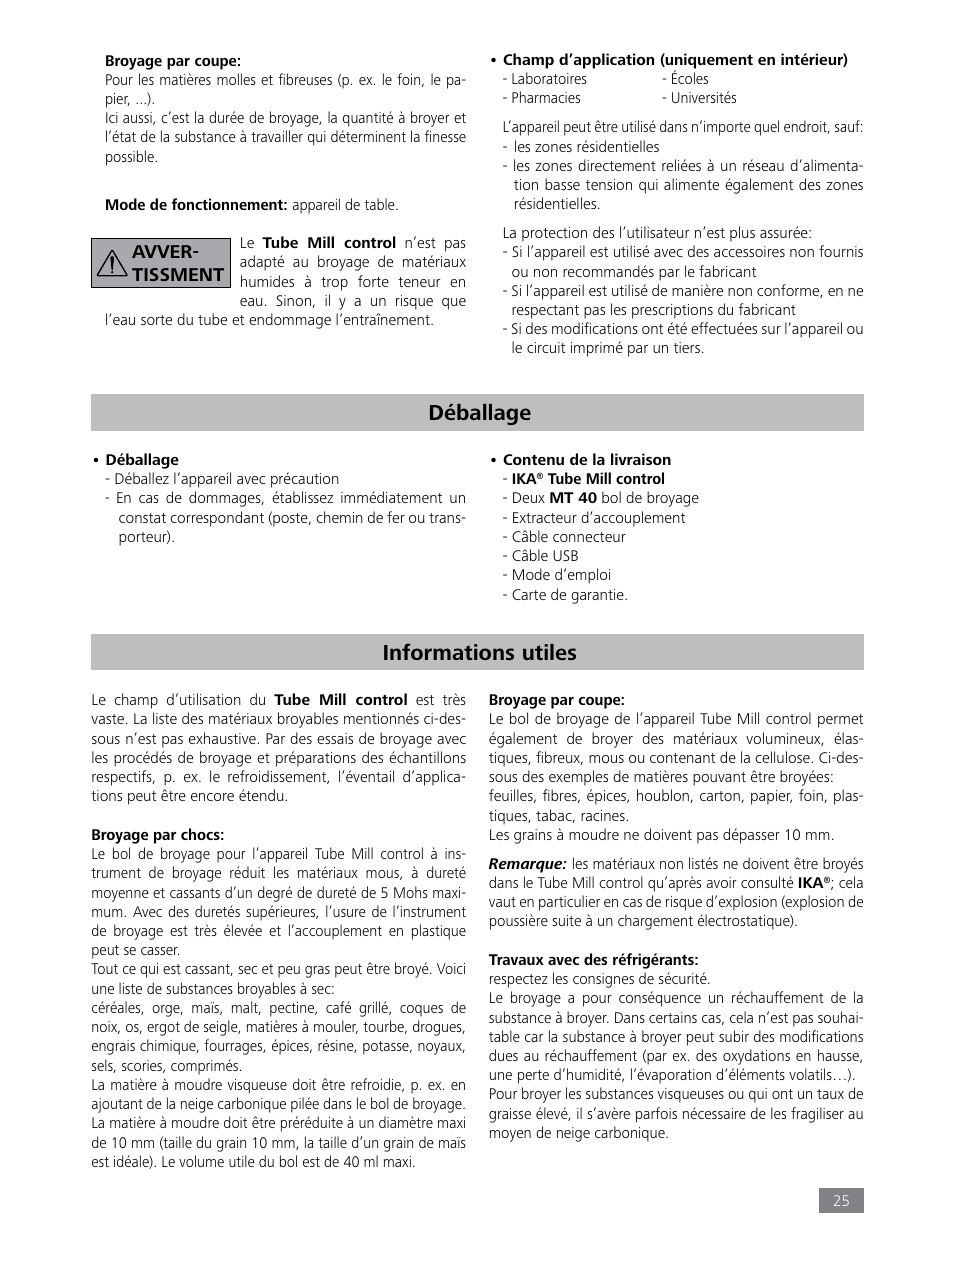 Déballage, Informations utiles | IKA Tube Mill control User Manual | Page 25 / 64